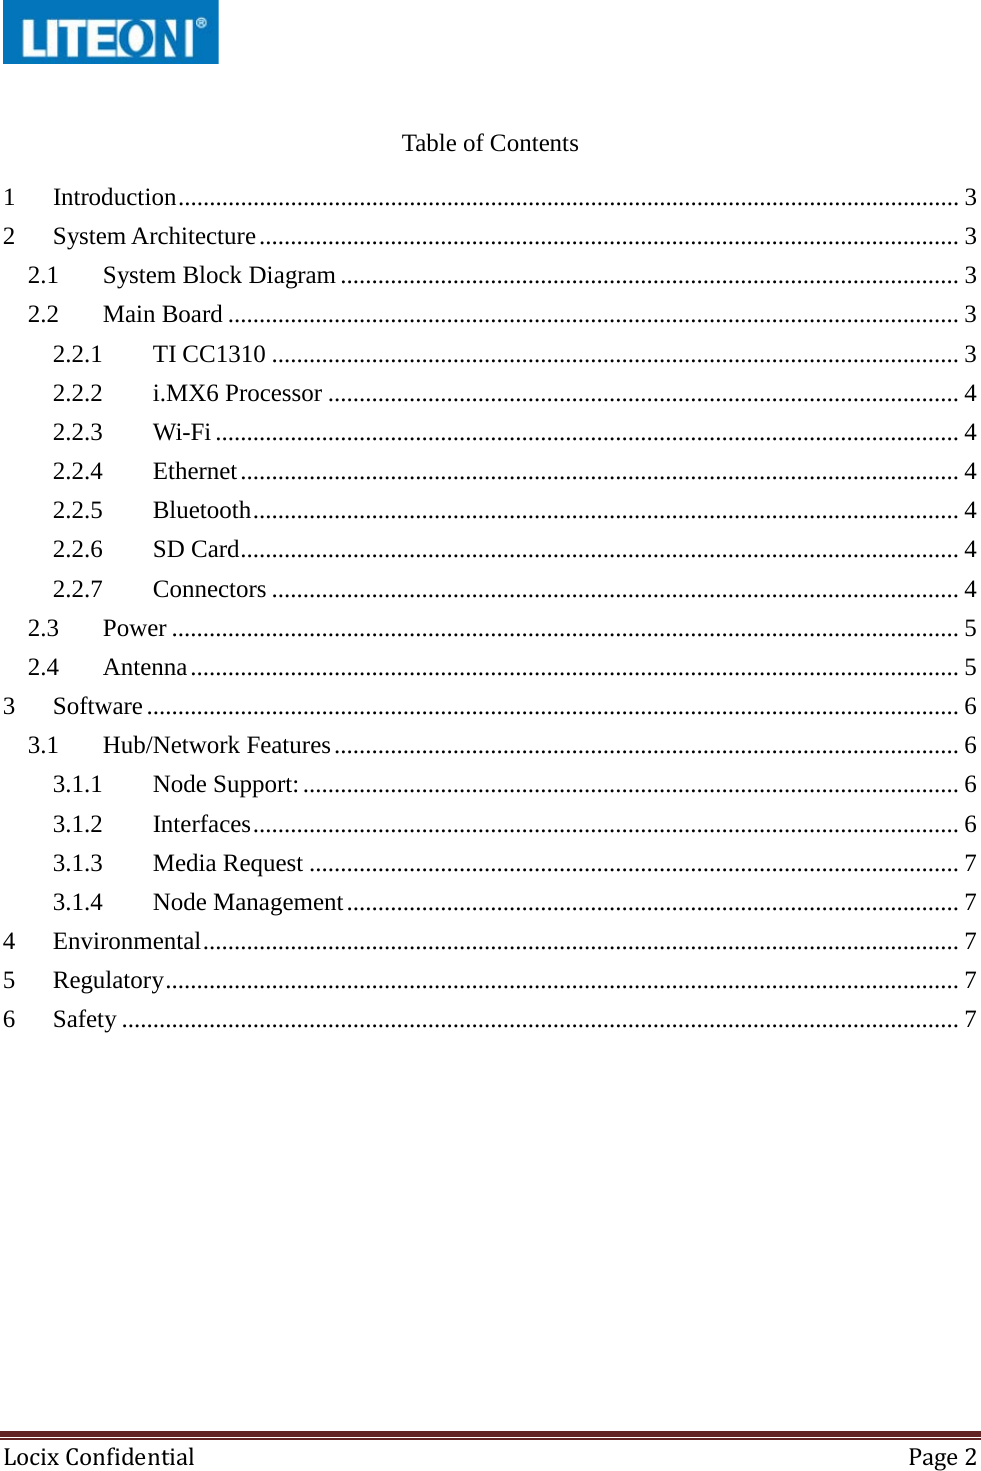  Locix Confidential Page 2   Table of Contents 1 Introduction ............................................................................................................................. 3 2 System Architecture ................................................................................................................ 3 2.1 System Block Diagram ................................................................................................... 3 2.2 Main Board ..................................................................................................................... 3 2.2.1 TI CC1310 .............................................................................................................. 3 2.2.2 i.MX6 Processor ..................................................................................................... 4 2.2.3 Wi-Fi ....................................................................................................................... 4 2.2.4 Ethernet ................................................................................................................... 4 2.2.5 Bluetooth ................................................................................................................. 4 2.2.6 SD Card ................................................................................................................... 4 2.2.7 Connectors .............................................................................................................. 4 2.3 Power .............................................................................................................................. 5 2.4 Antenna ........................................................................................................................... 5 3 Software .................................................................................................................................. 6 3.1 Hub/Network Features .................................................................................................... 6 3.1.1 Node Support: ......................................................................................................... 6 3.1.2 Interfaces ................................................................................................................. 6 3.1.3 Media Request ........................................................................................................ 7 3.1.4 Node Management .................................................................................................. 7 4 Environmental ......................................................................................................................... 7 5 Regulatory ............................................................................................................................... 7 6 Safety ...................................................................................................................................... 7     